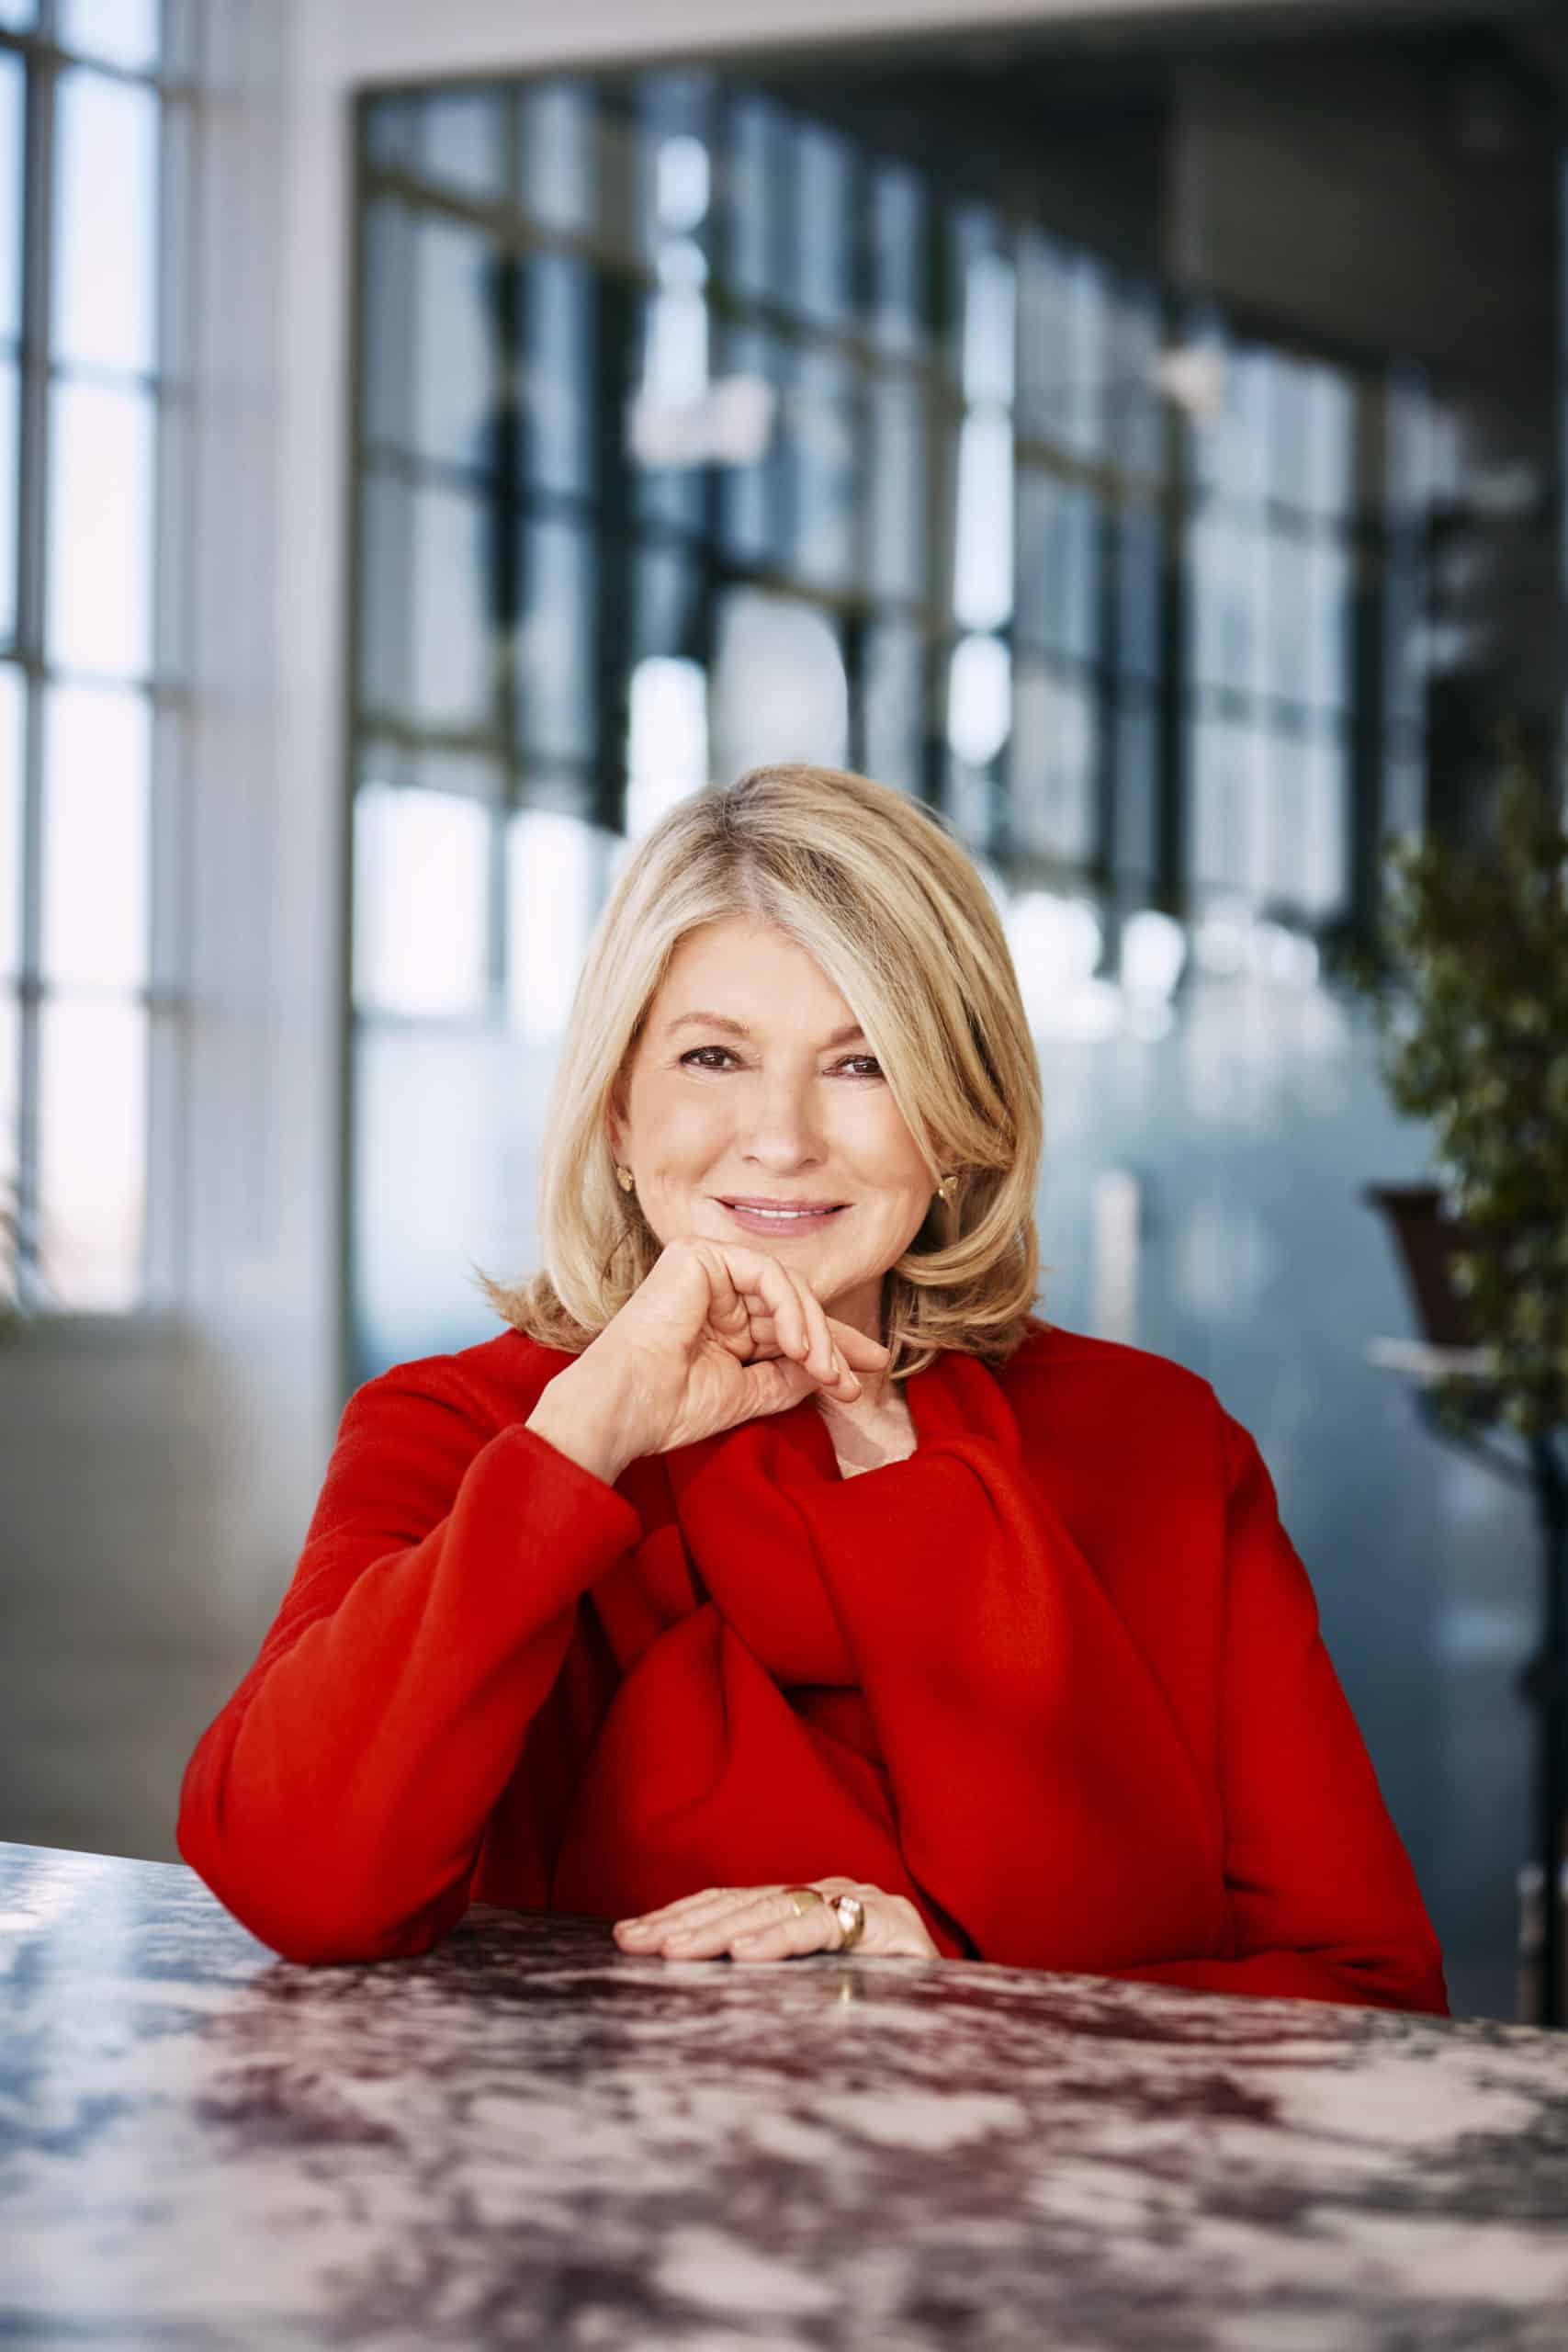 Martha Stewart photographed by Weston Wells for The Wall Street Journal